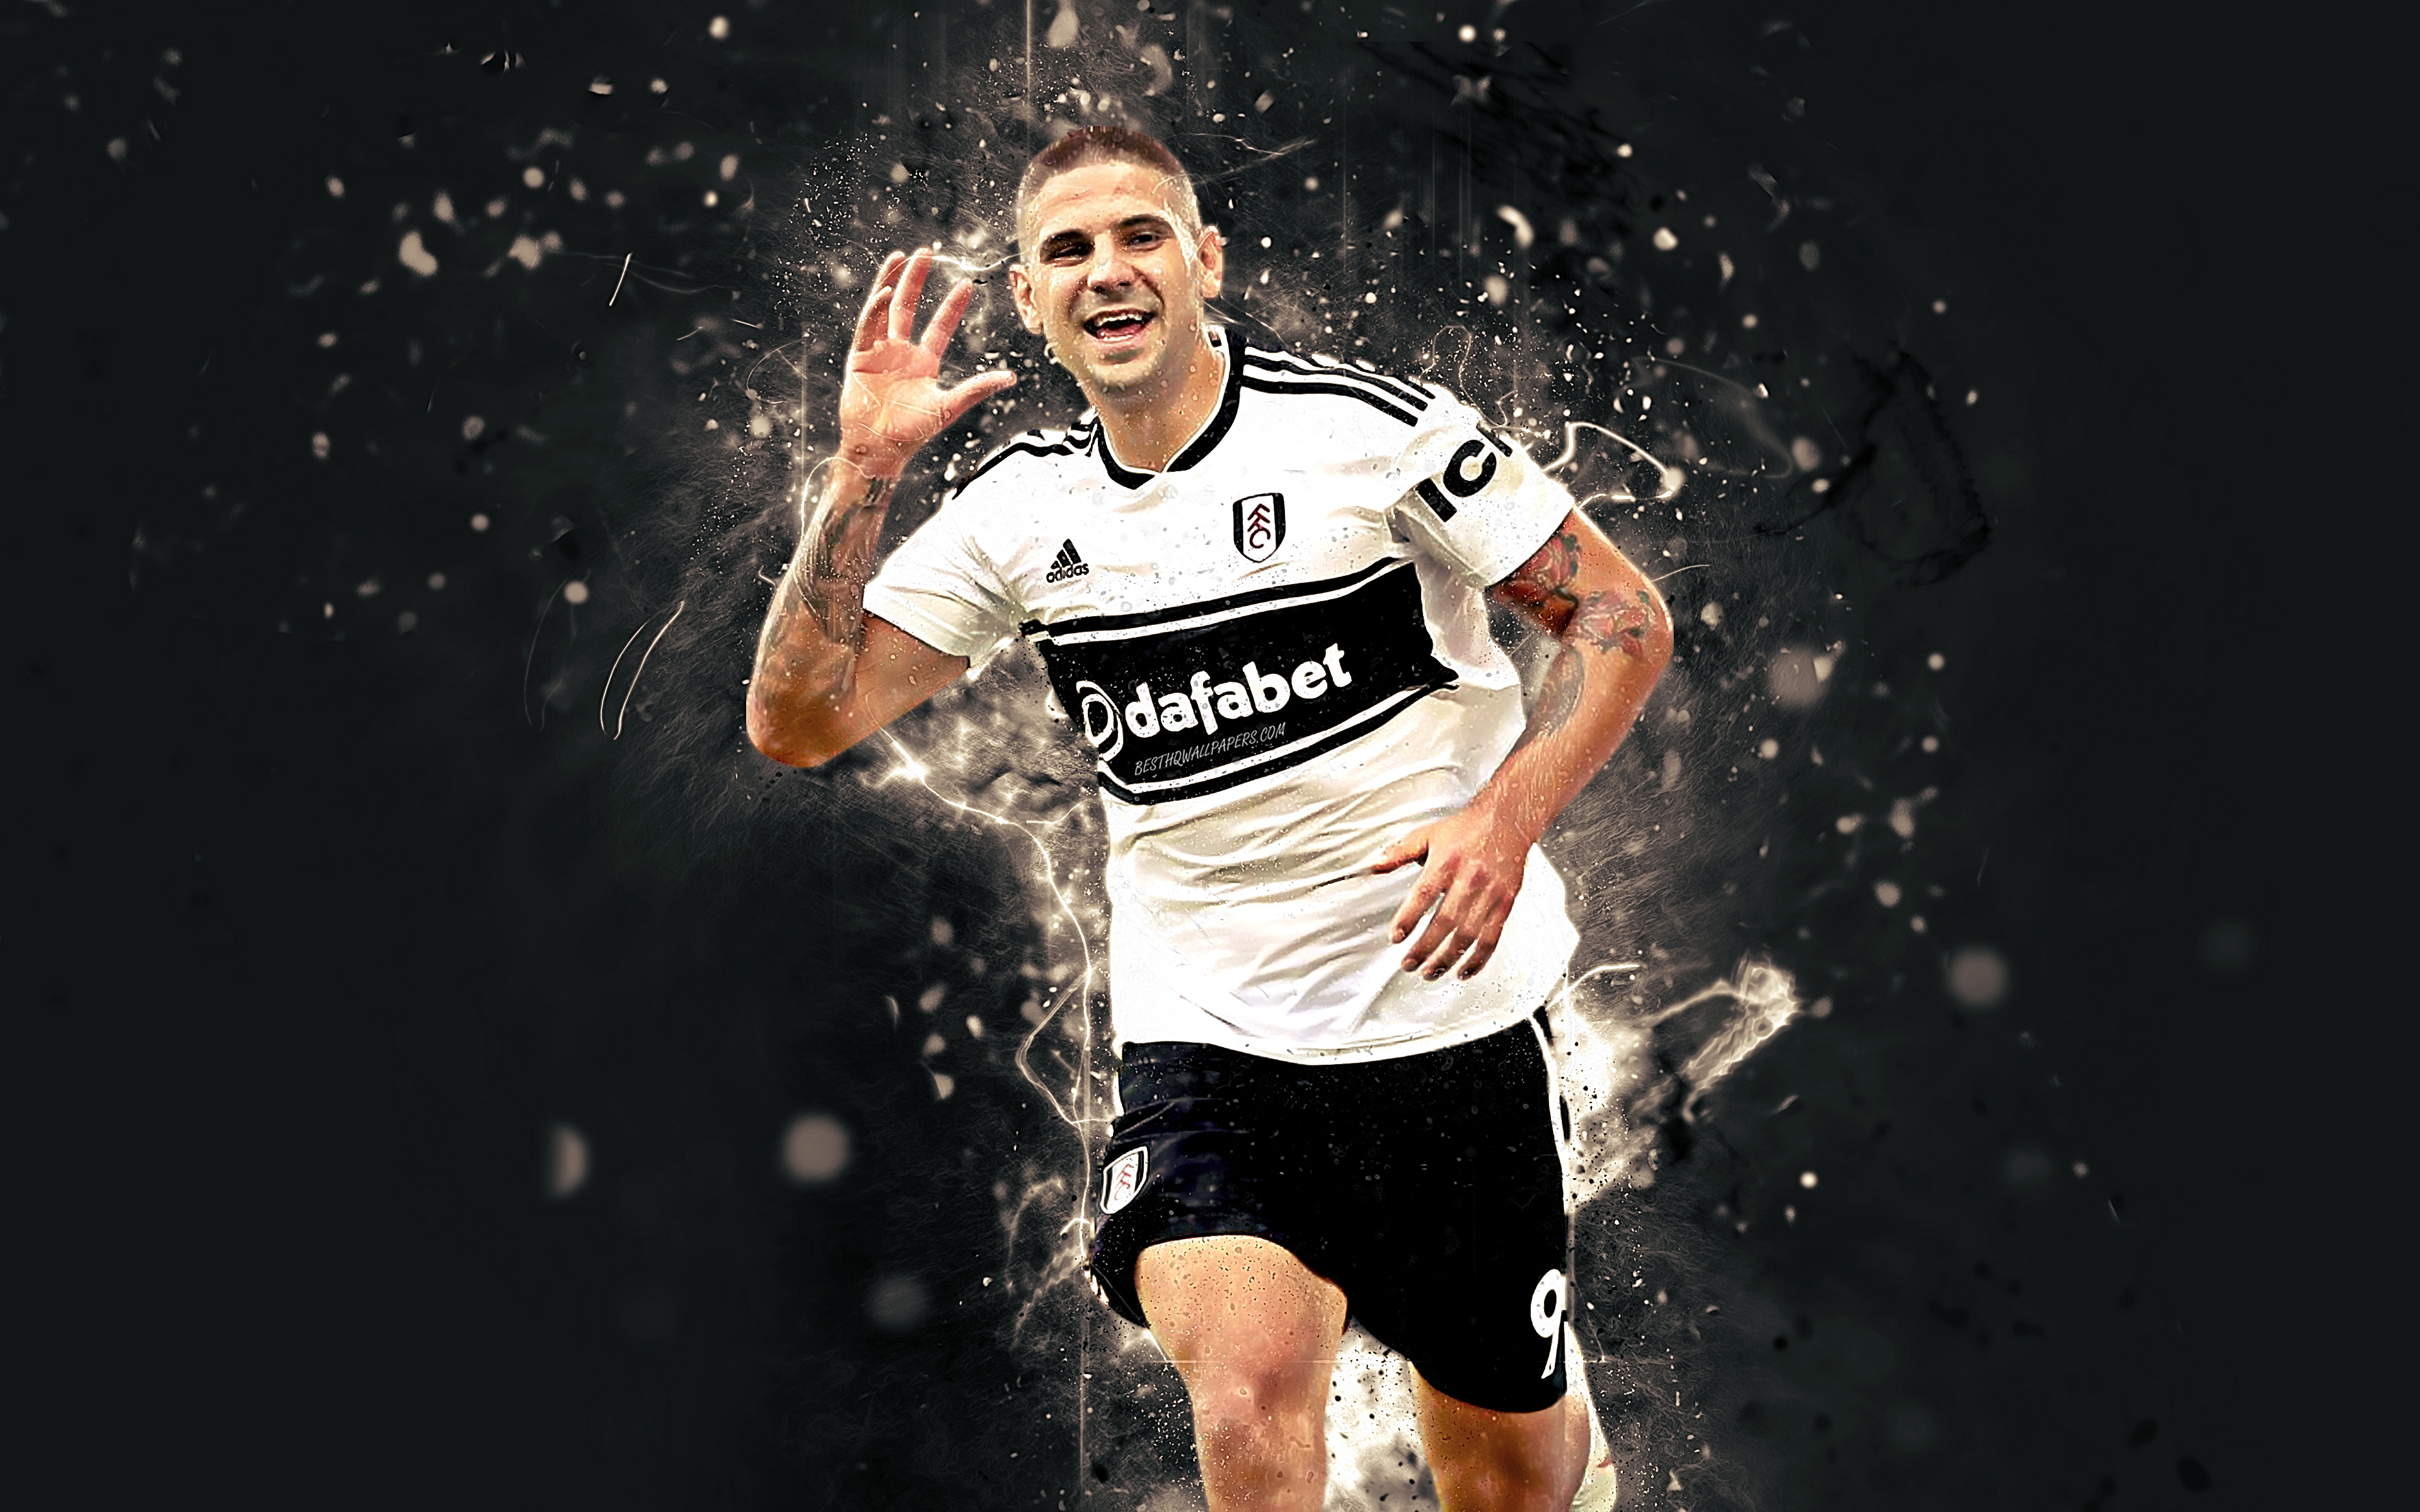 Download wallpaper Aleksandar Mitrovic, 4k, abstract art, football, Fulham, soccer, Mitrovic, Premier League, footballers, neon lights, Serbian footballer, Fulham FC for desktop with resolution 3840x2400. High Quality HD picture wallpaper